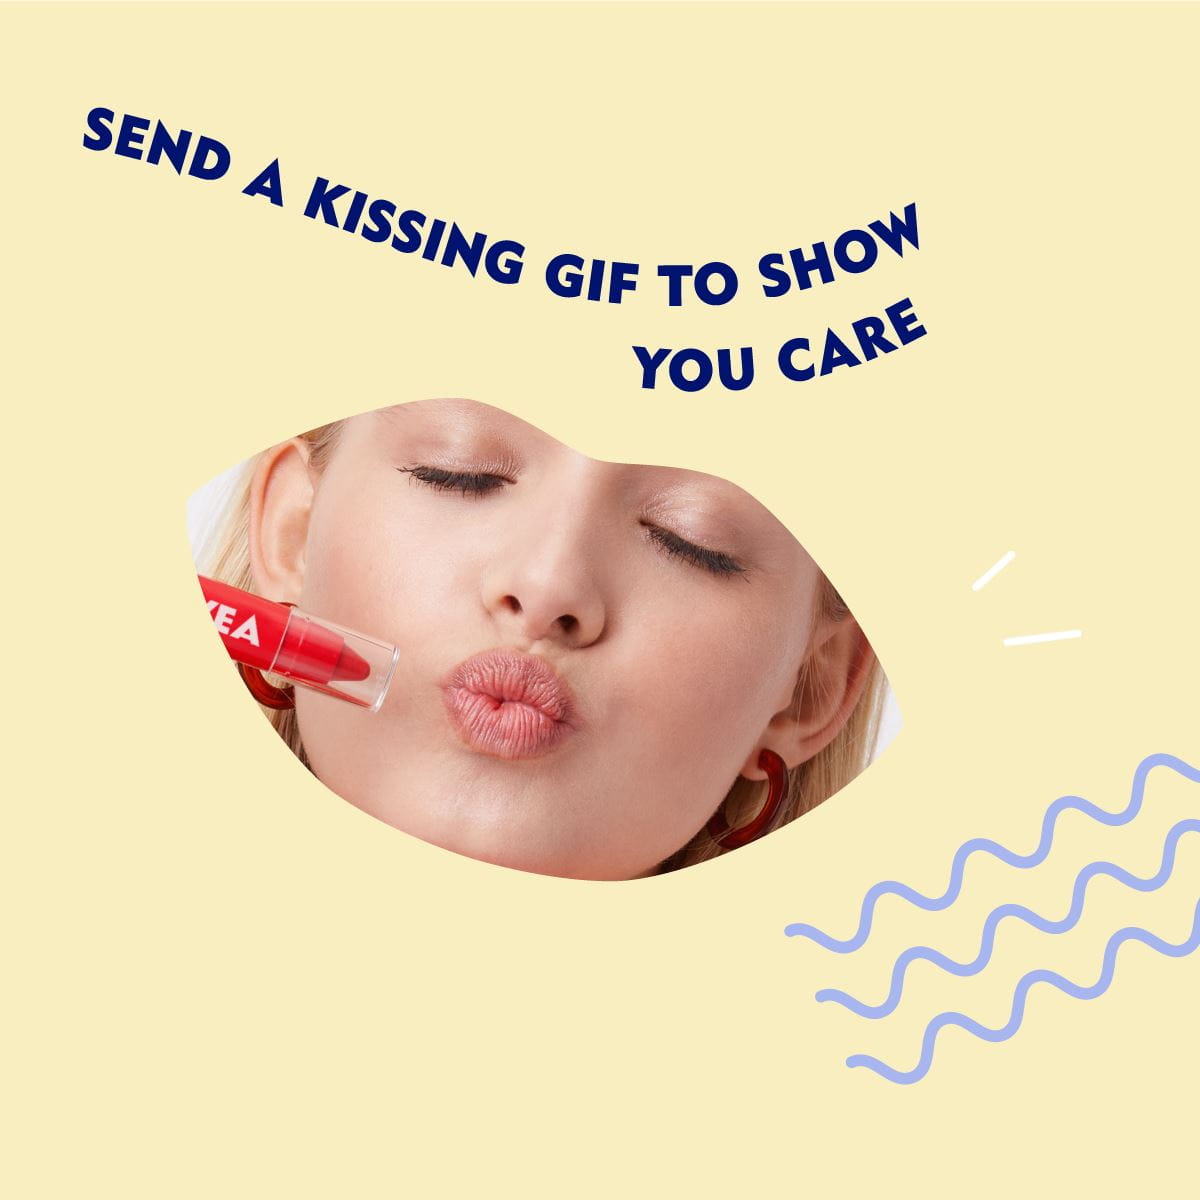 SEND A KISSING GIF TO SHOW YOU CARE